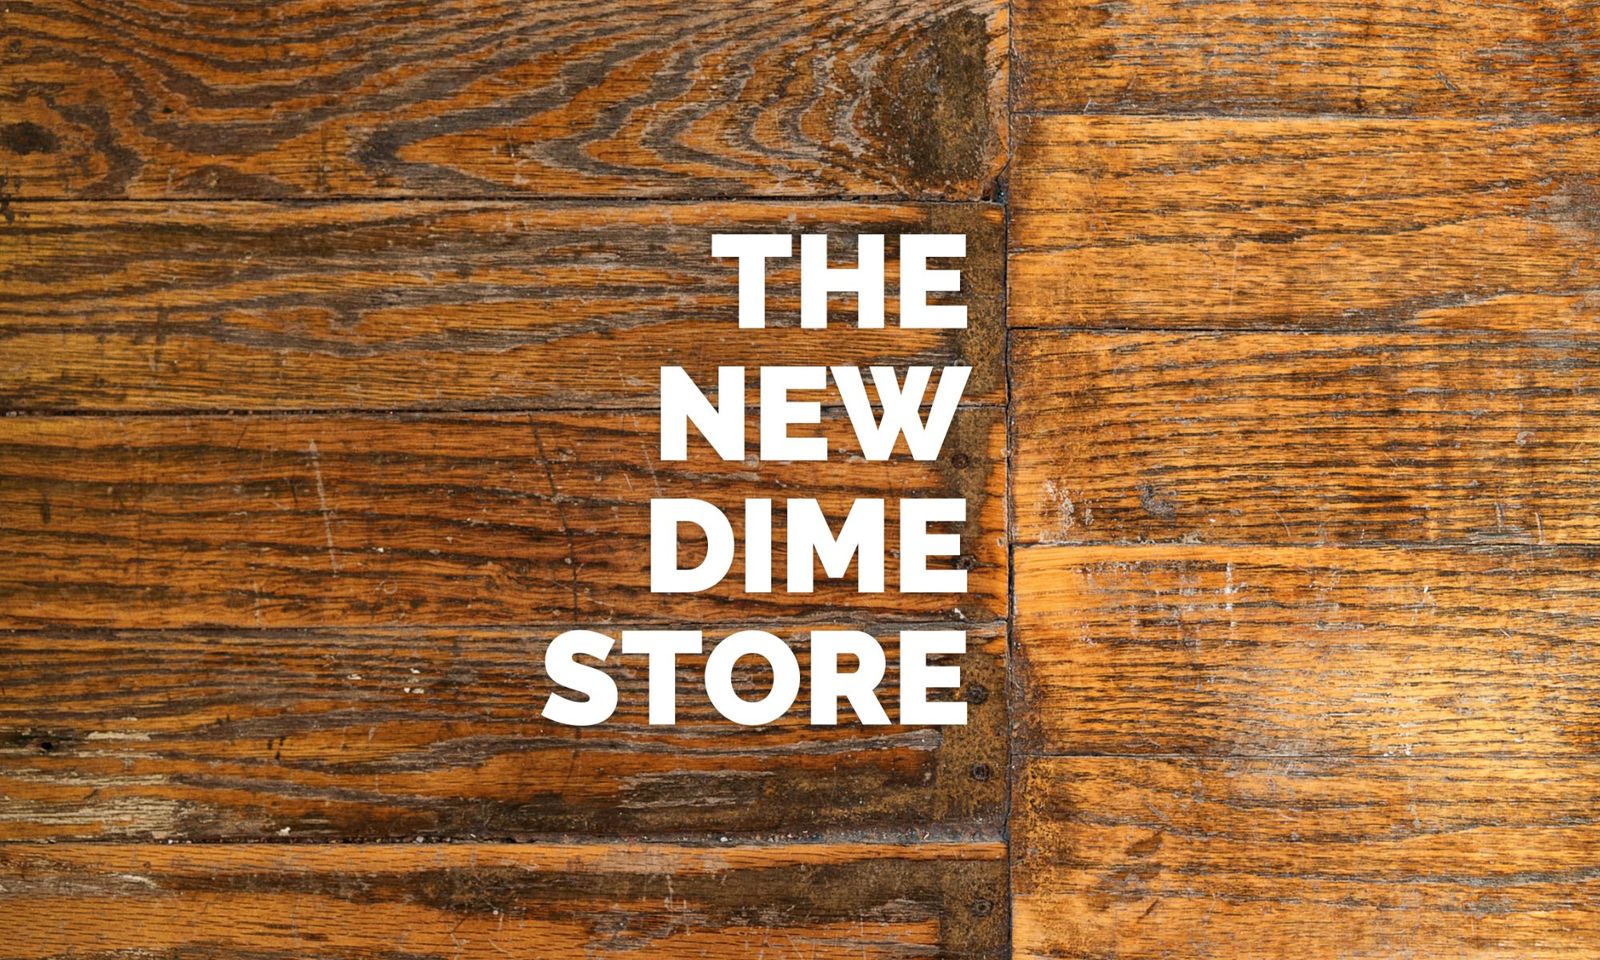 The New Dime Store